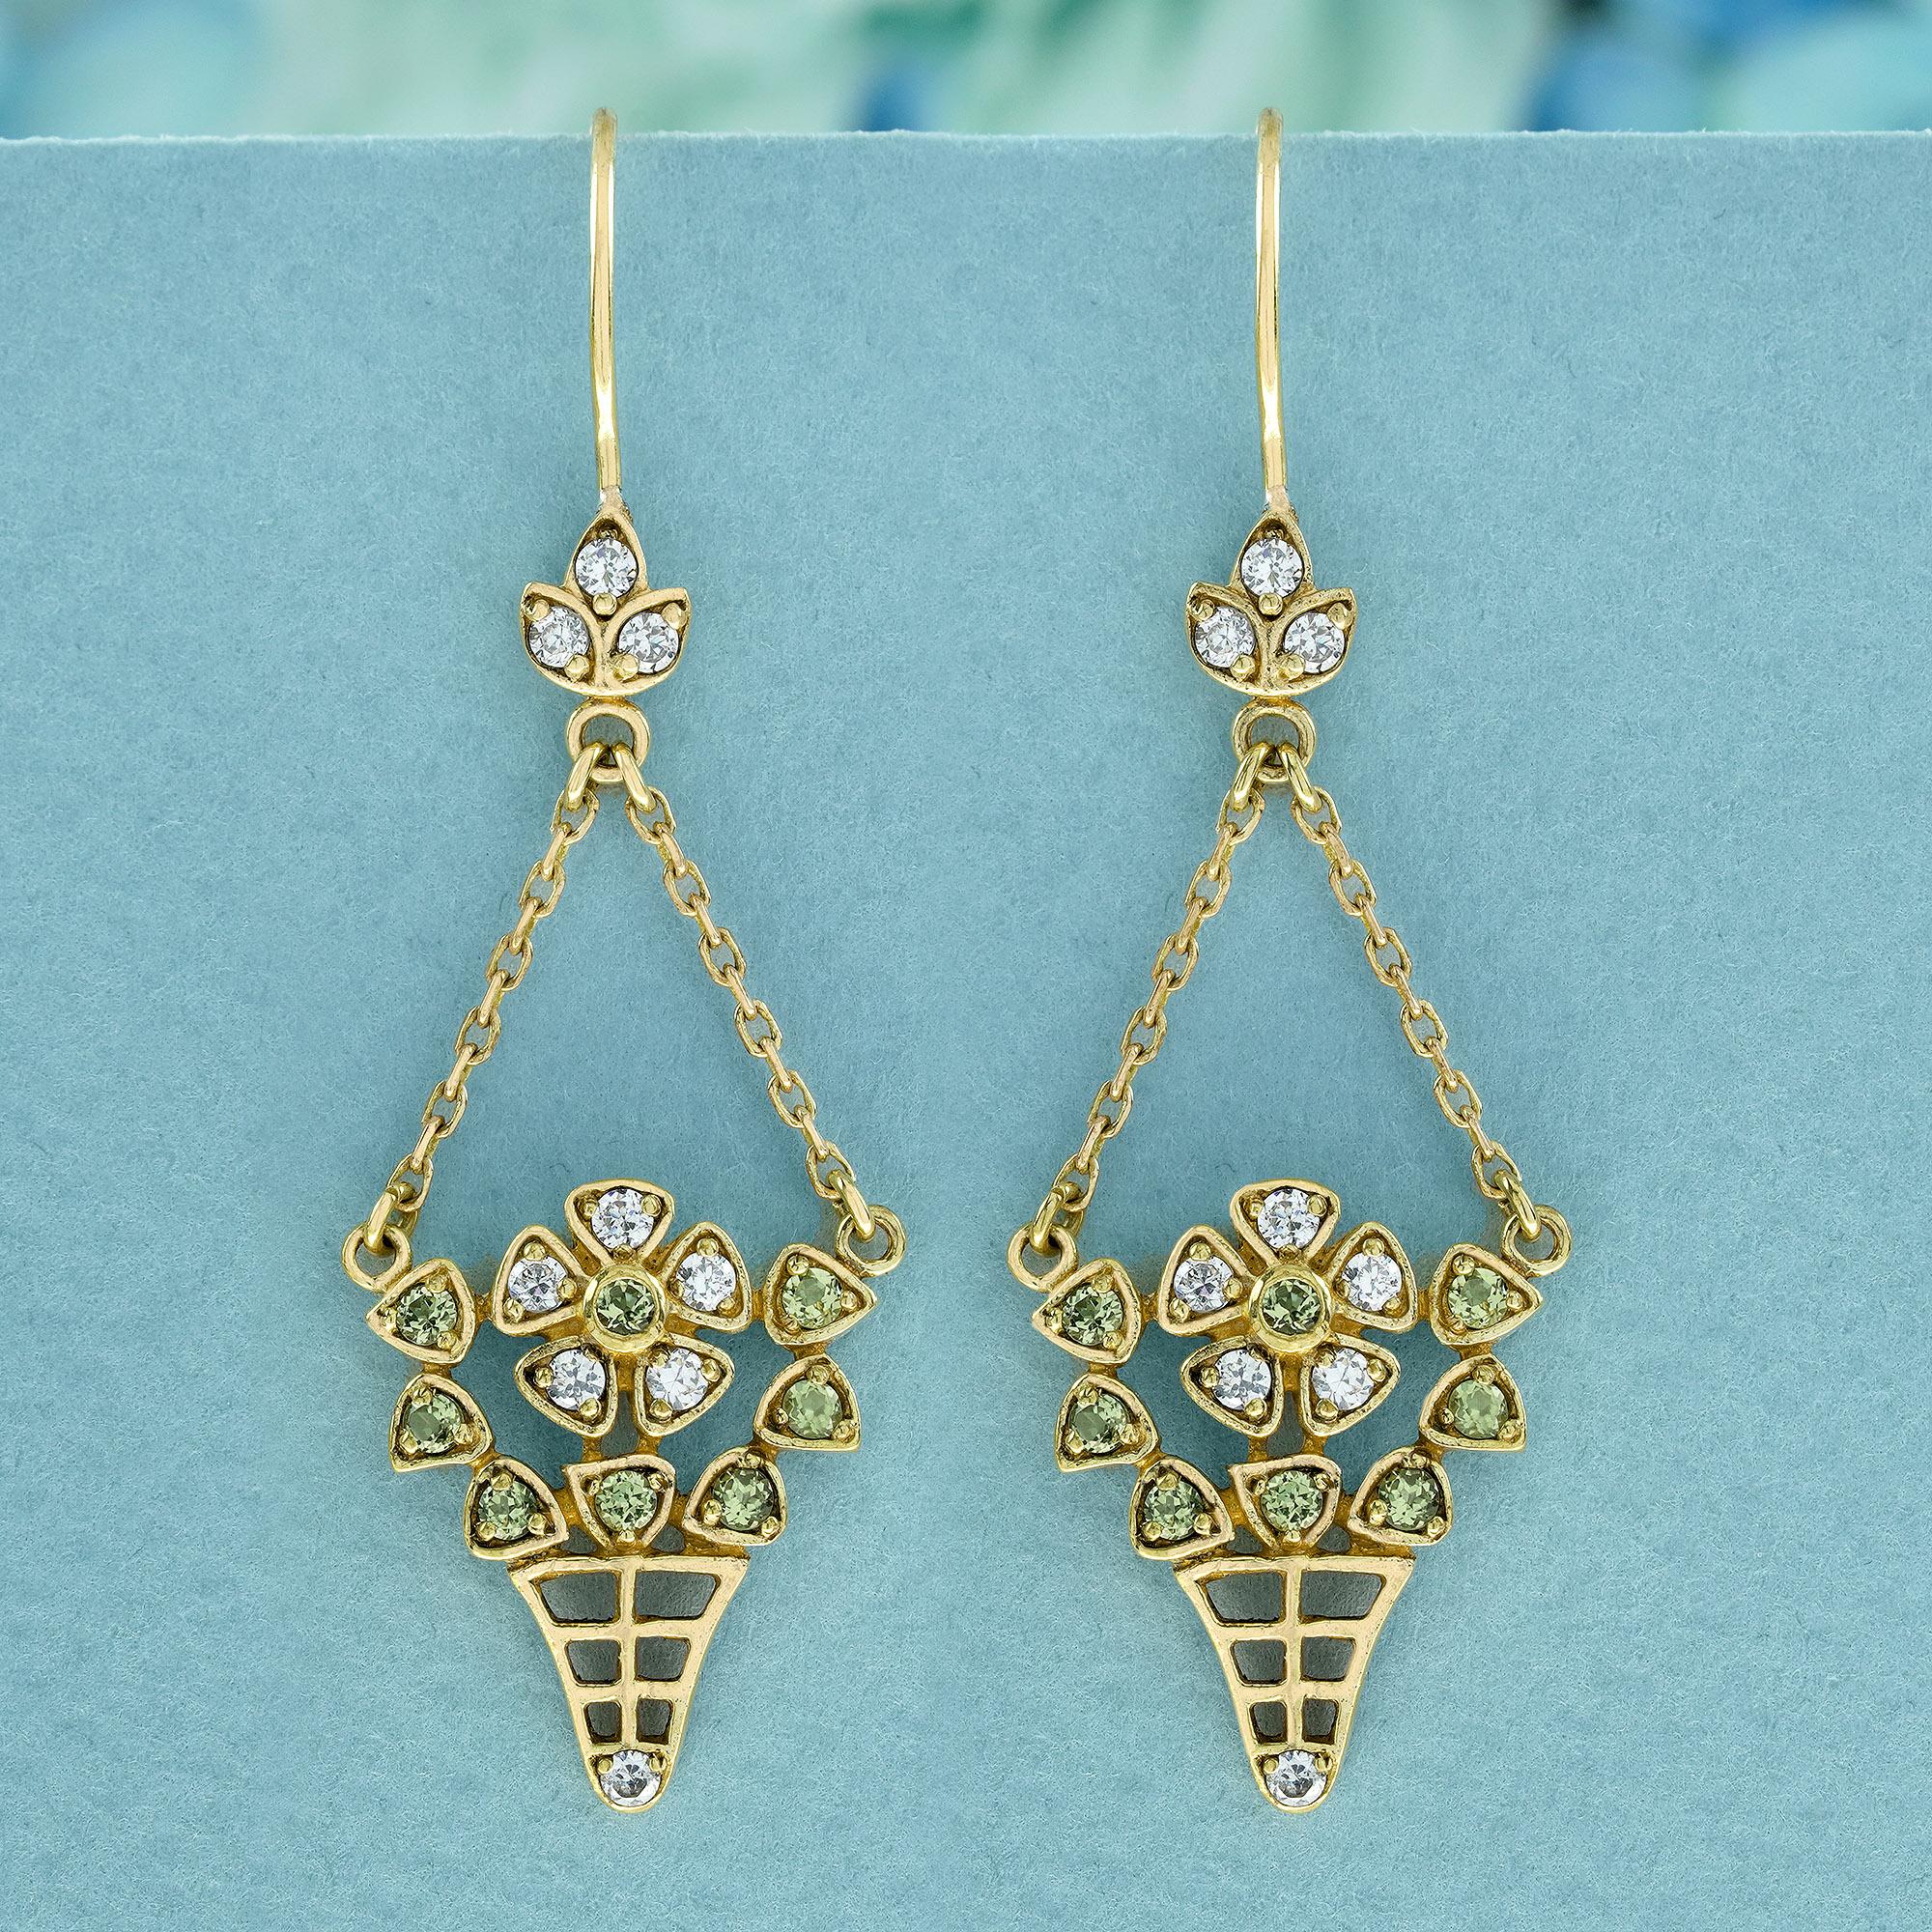 These vintage-style floral basket drop earrings, meticulously crafted from delicate yellow gold. The enchanting design features a basket suspended from a cluster of small diamonds within a leaf-shaped frame at the top. Within the basket, a